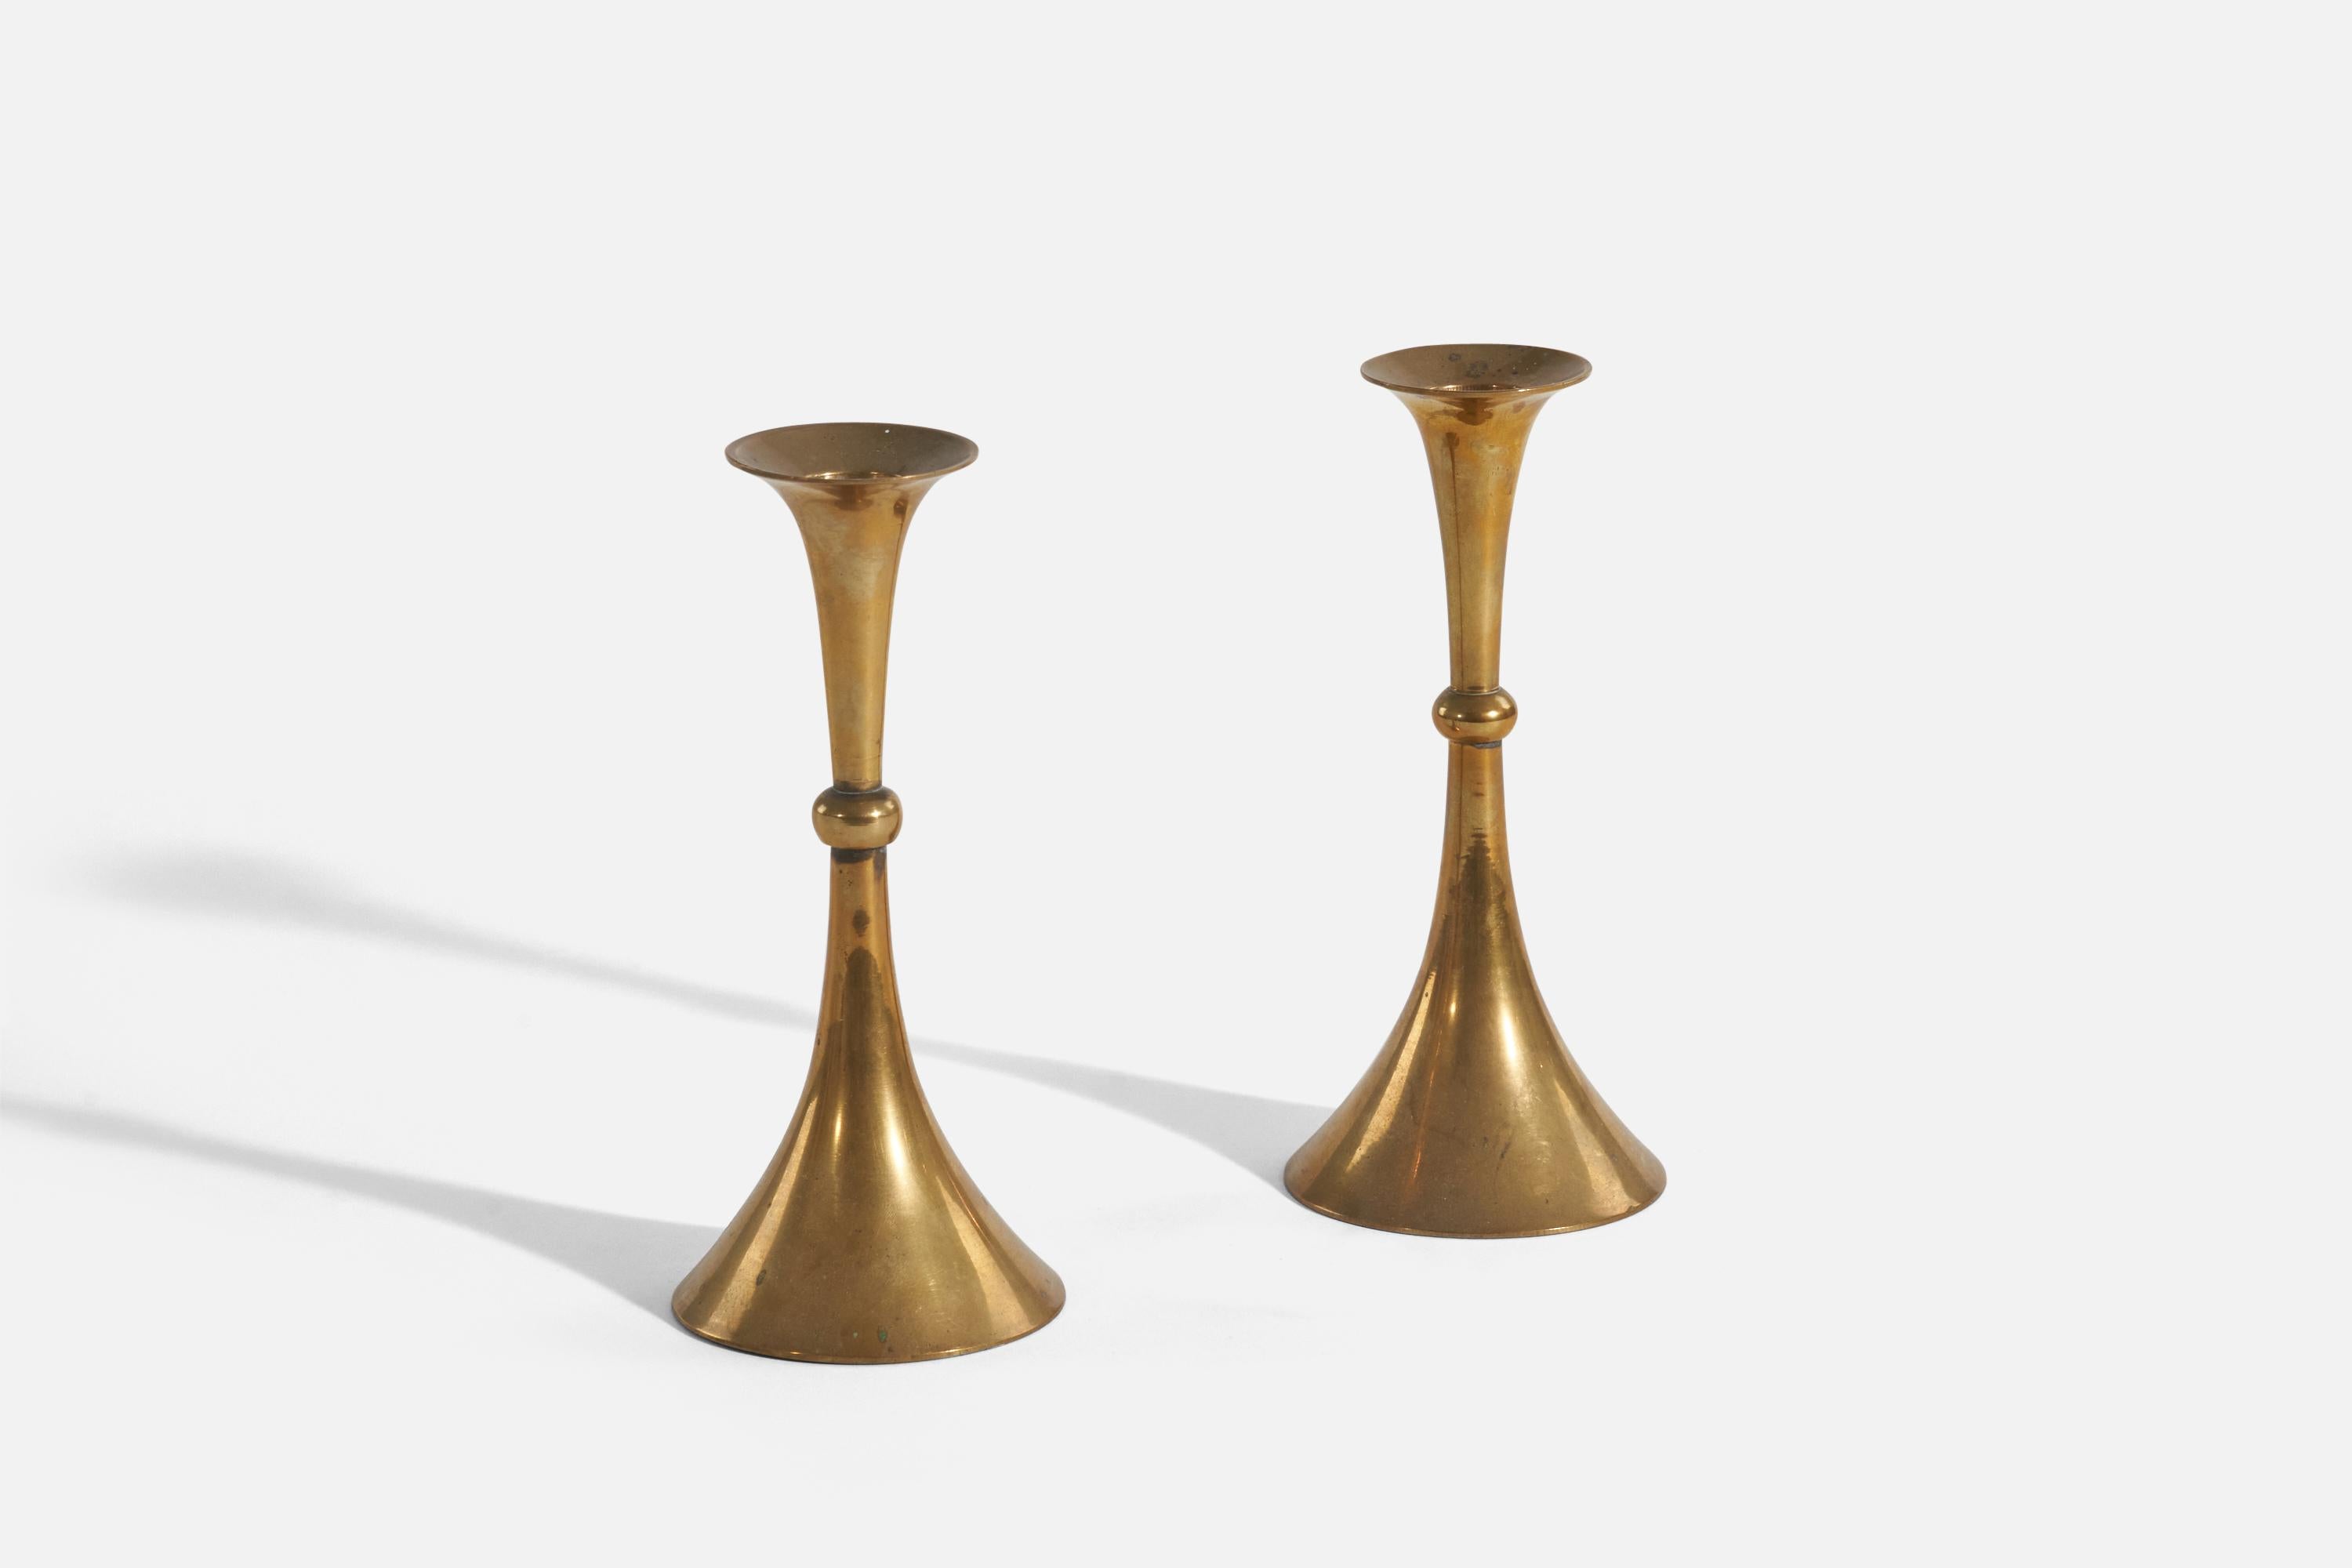 A pair of brass candlesticks designed and produced in Sweden, 1940s.